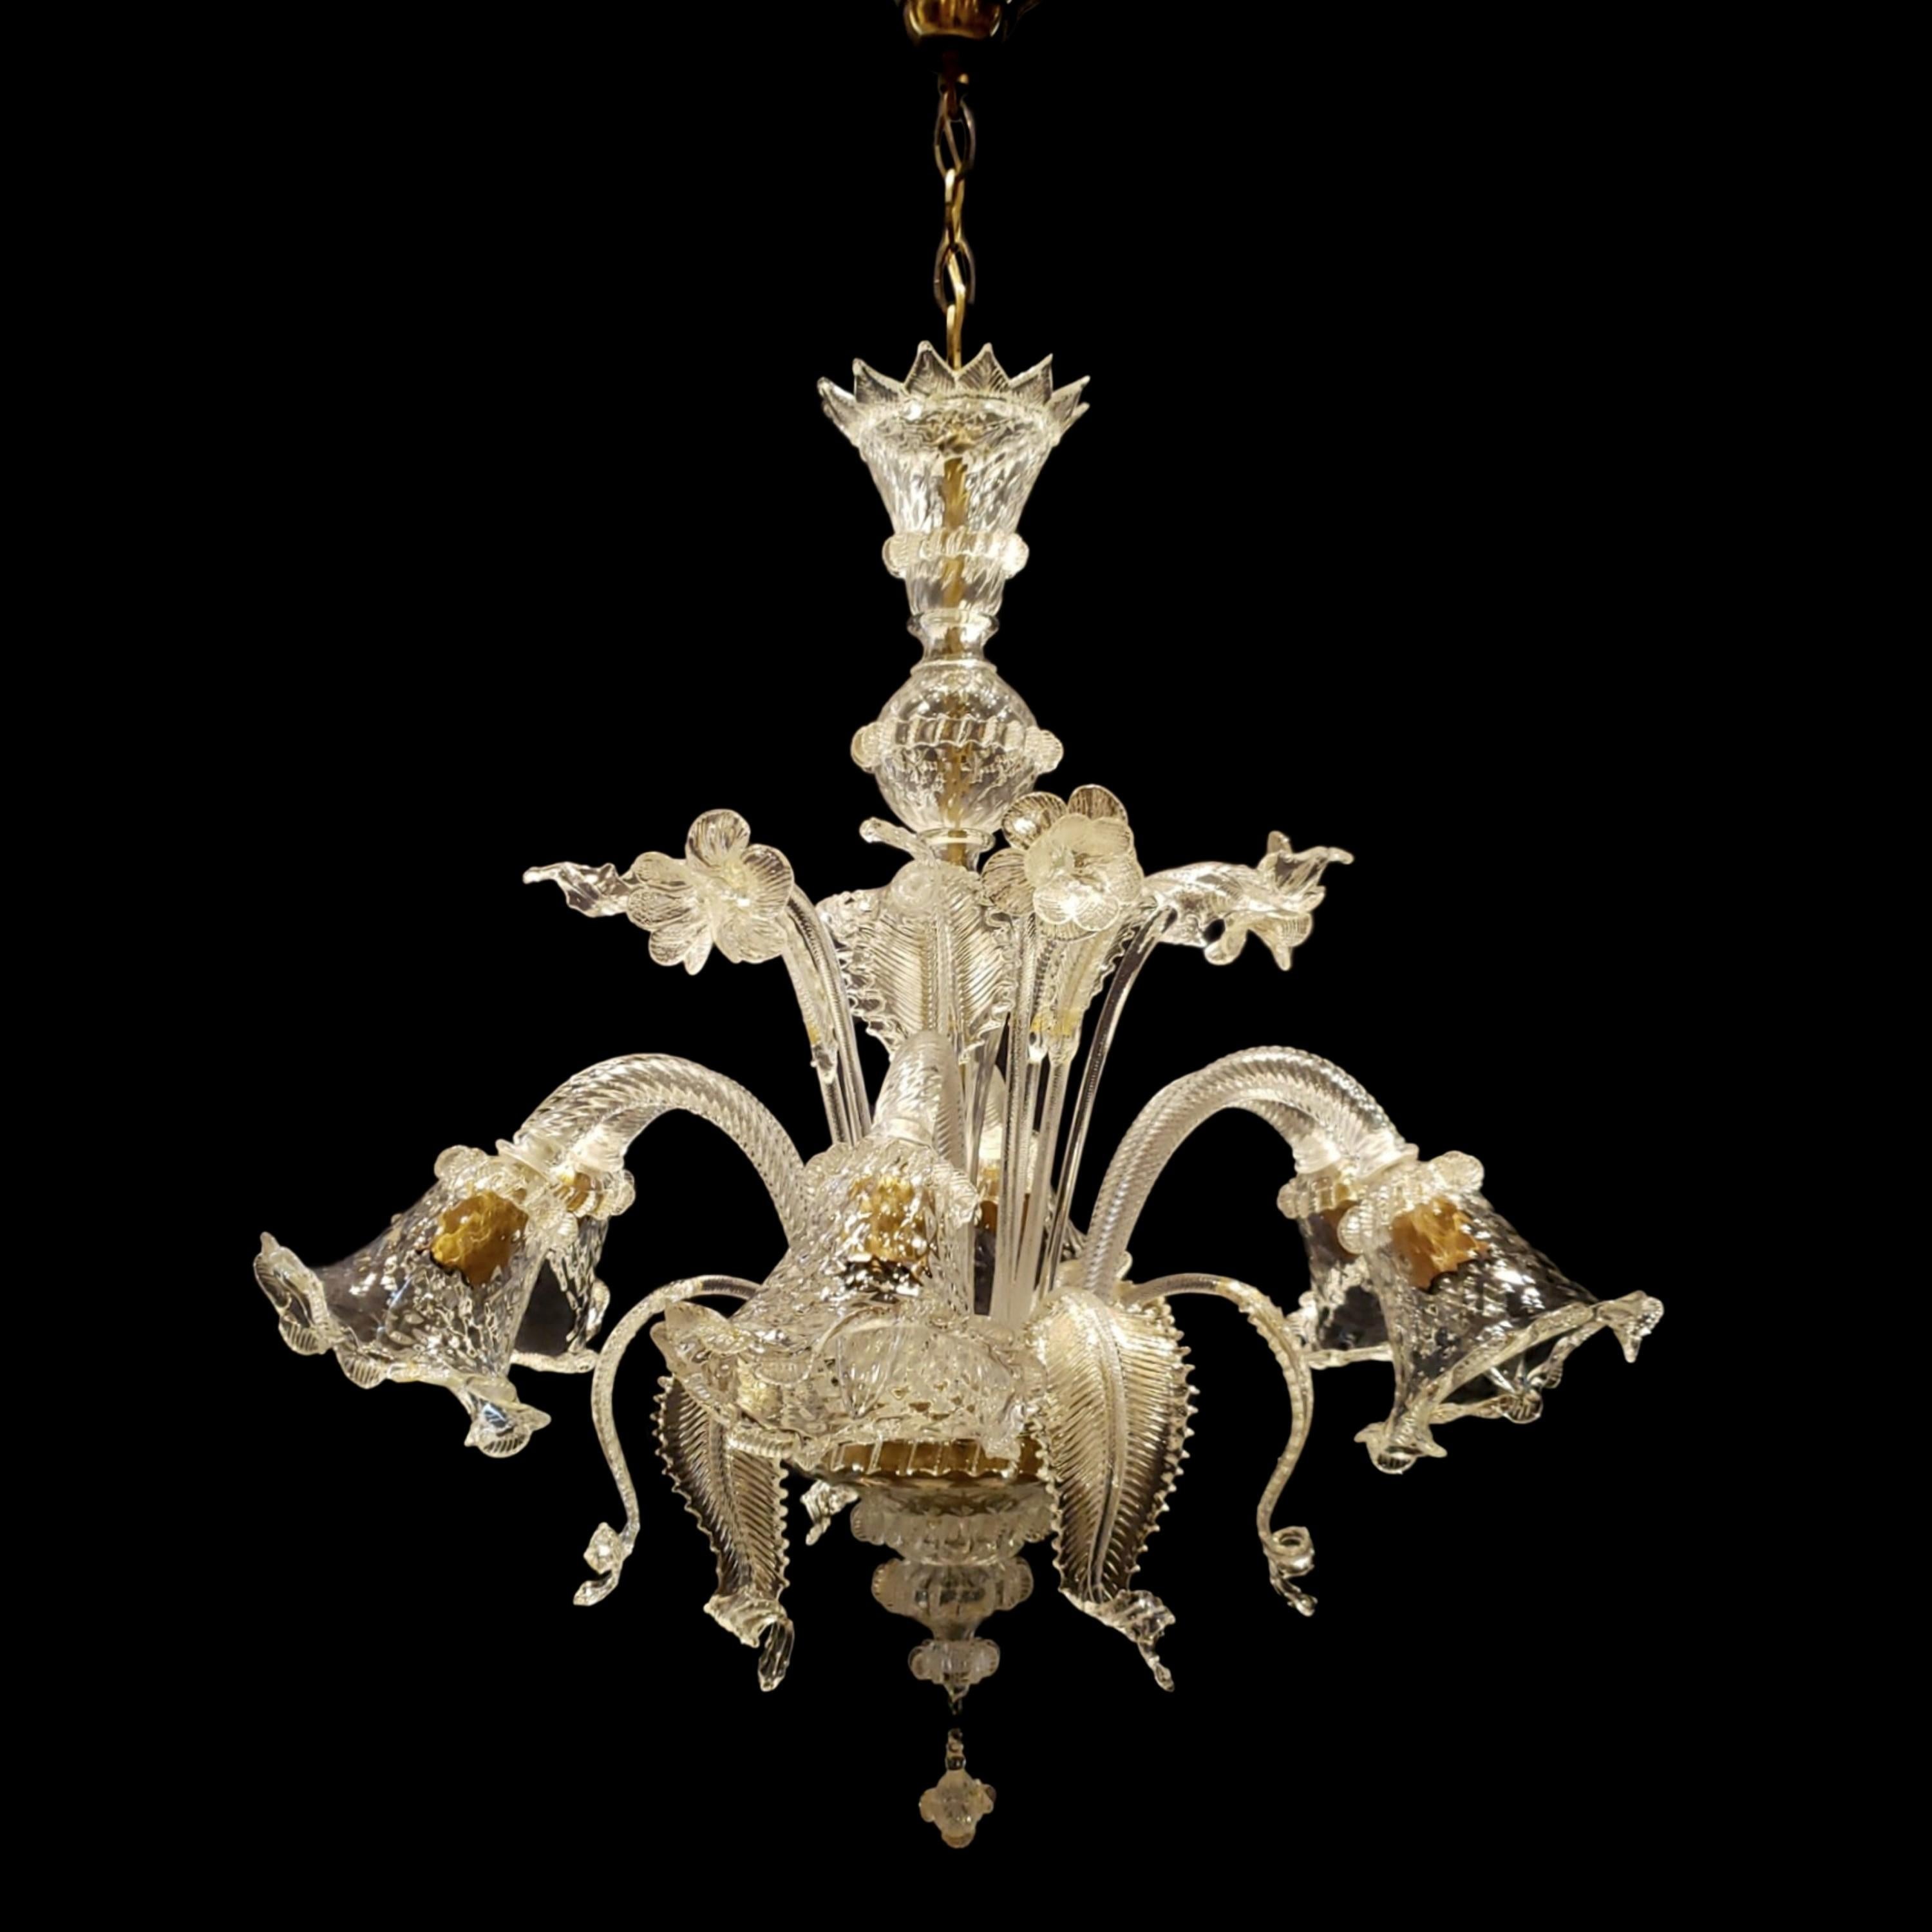 Large clear hand made glass six arm Italian Murano chandelier with quilted down light shades and up and down leaves with flowers. This comes rewired and ready to install. Ships disassembled.  Cleaned and restored. Please note, this item is located